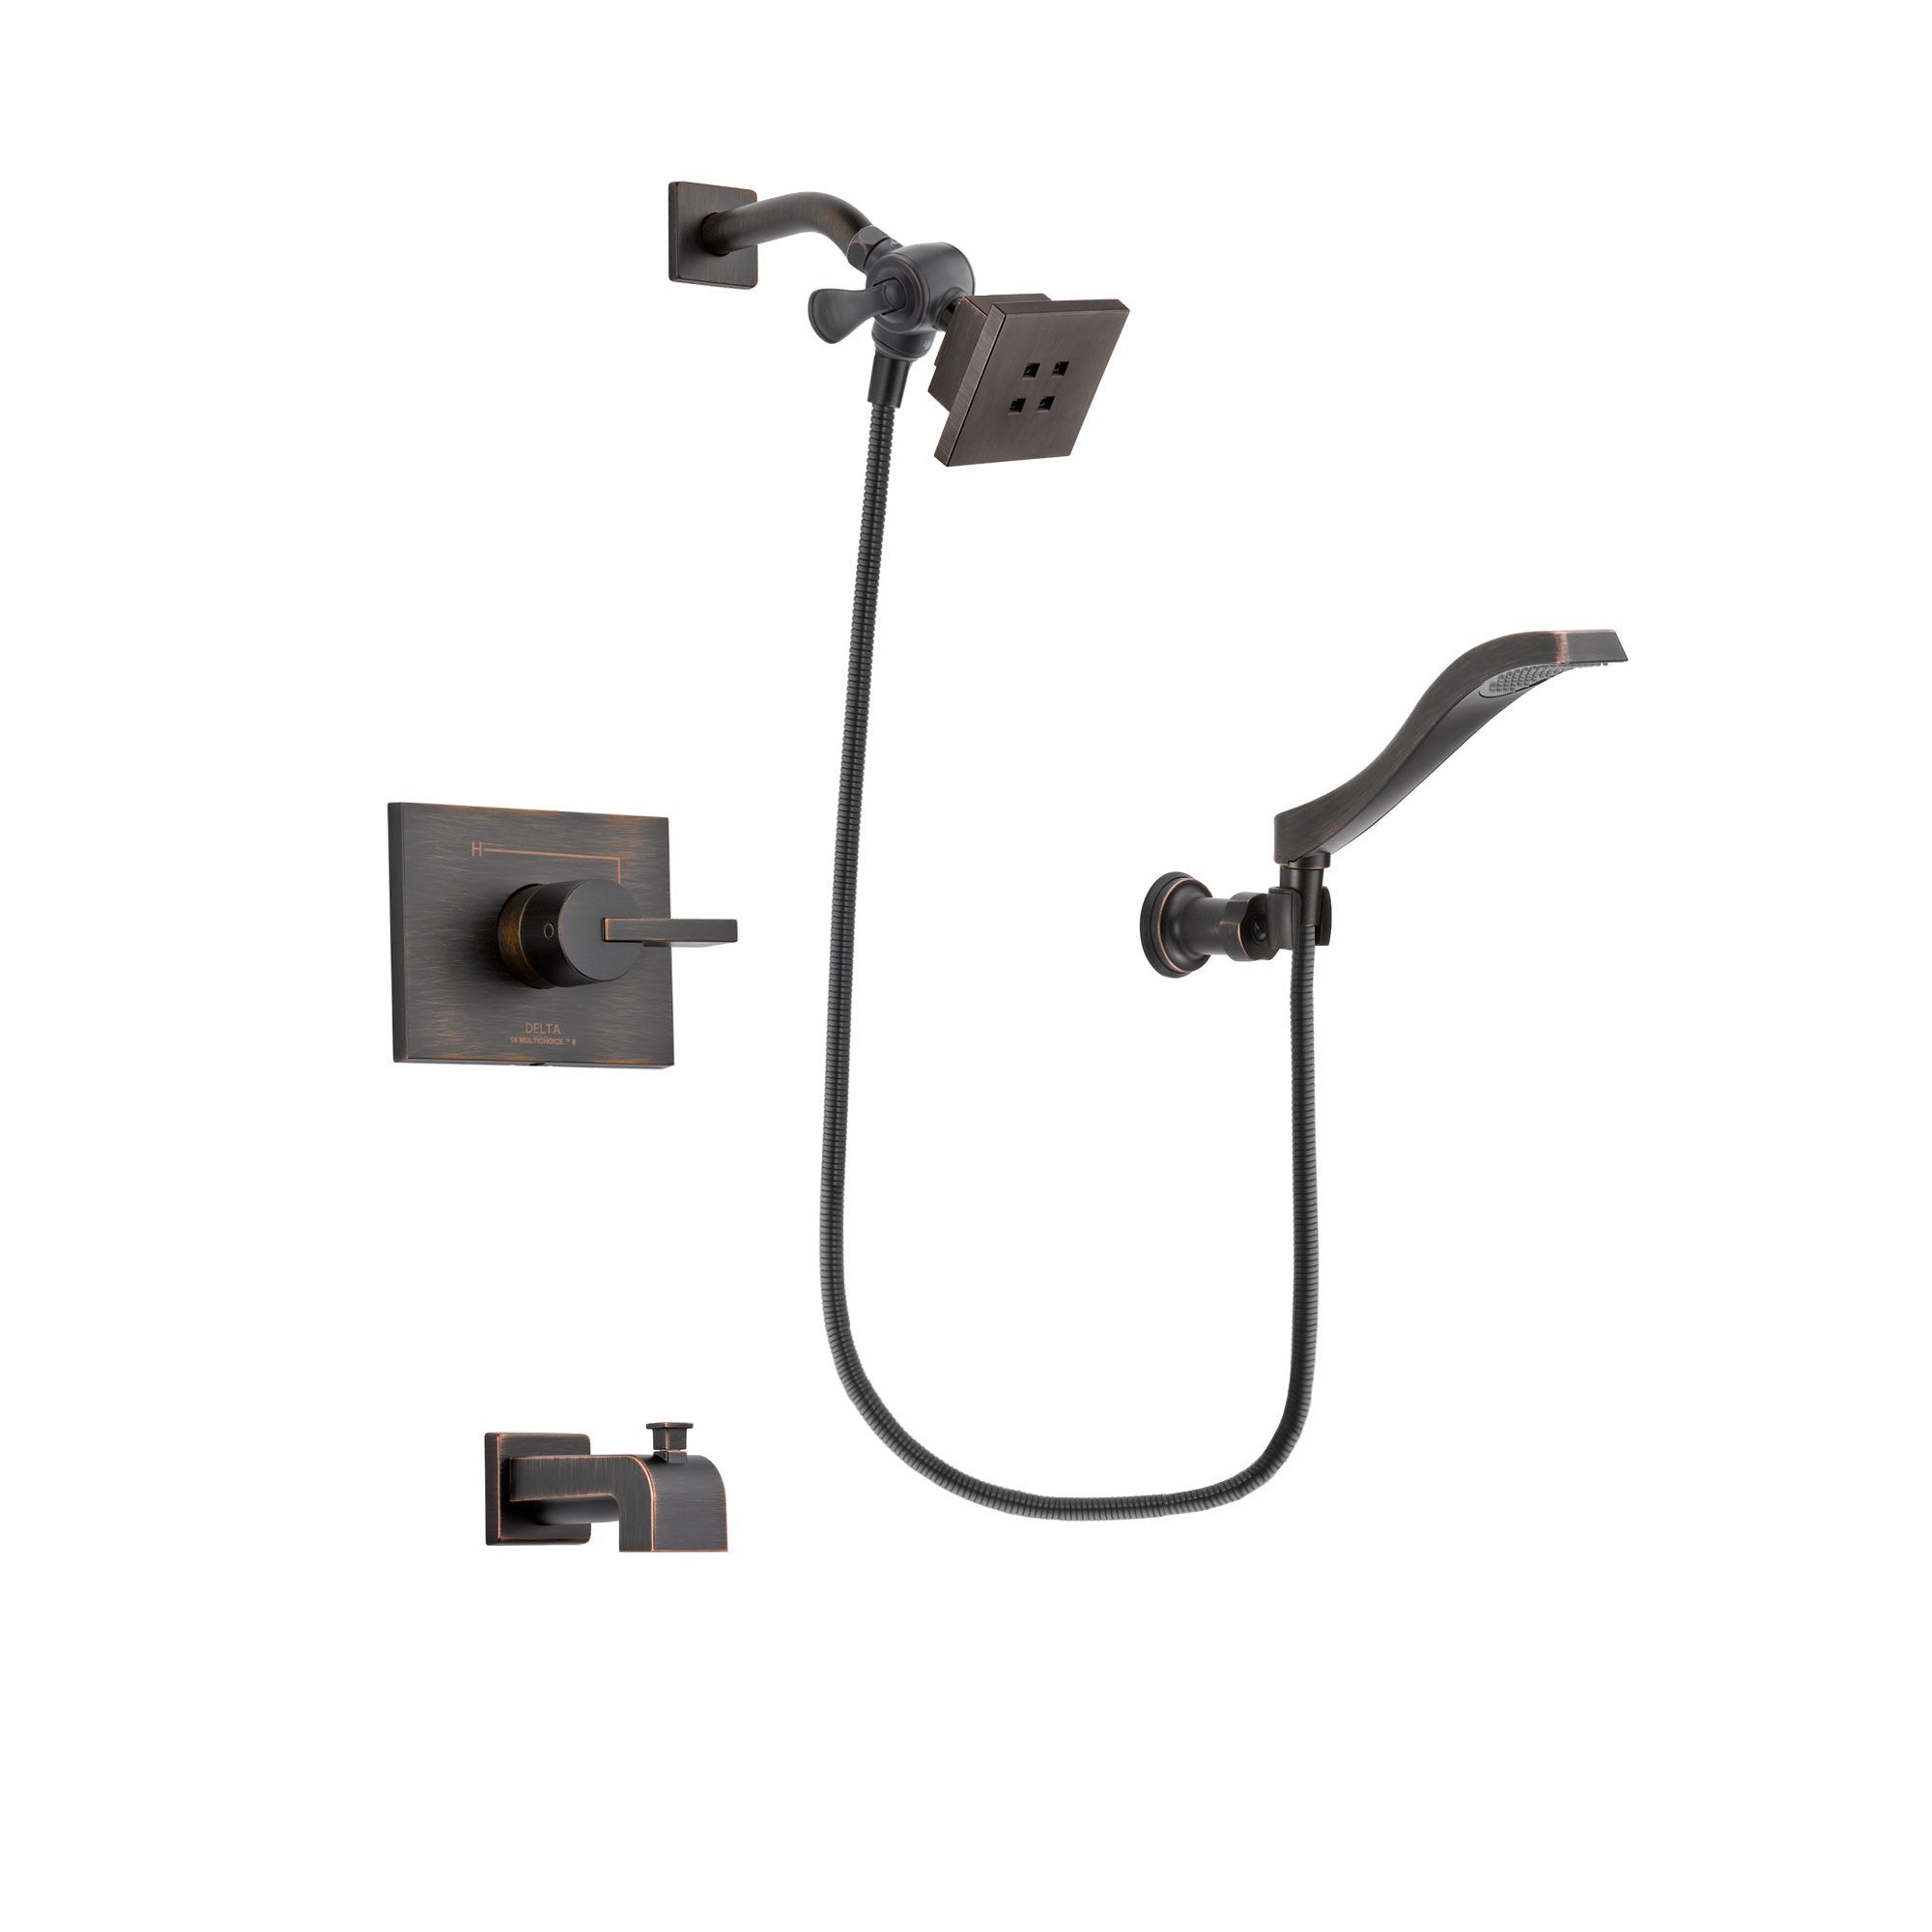 Delta Vero Venetian Bronze Finish Tub and Shower Faucet System Package with Square Showerhead and Modern Wall Mount Handheld Shower Spray Includes Rough-in Valve and Tub Spout DSP3215V